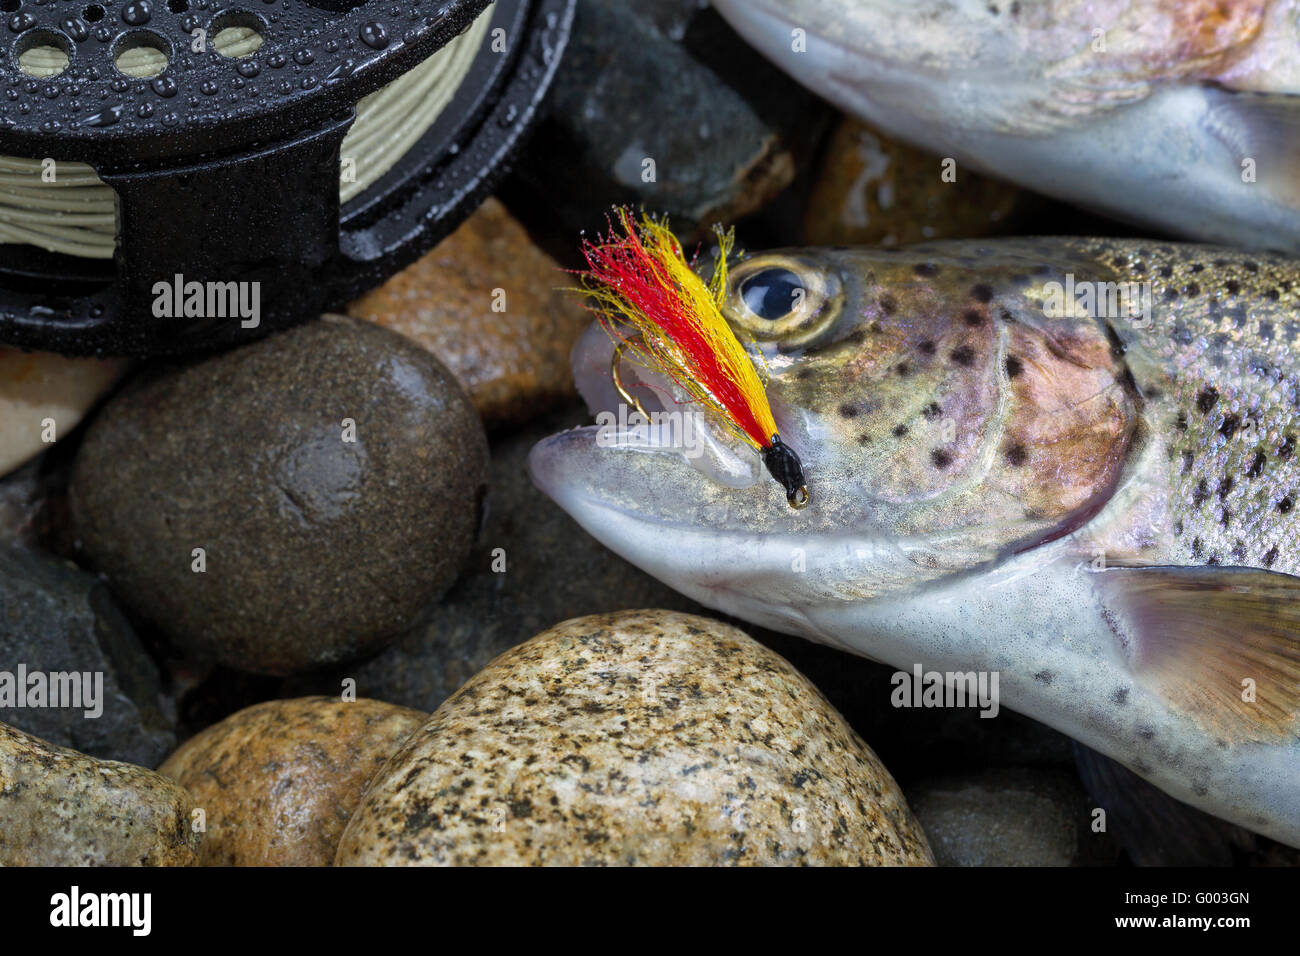 Trout Fly in mouth of Trout Stock Photo